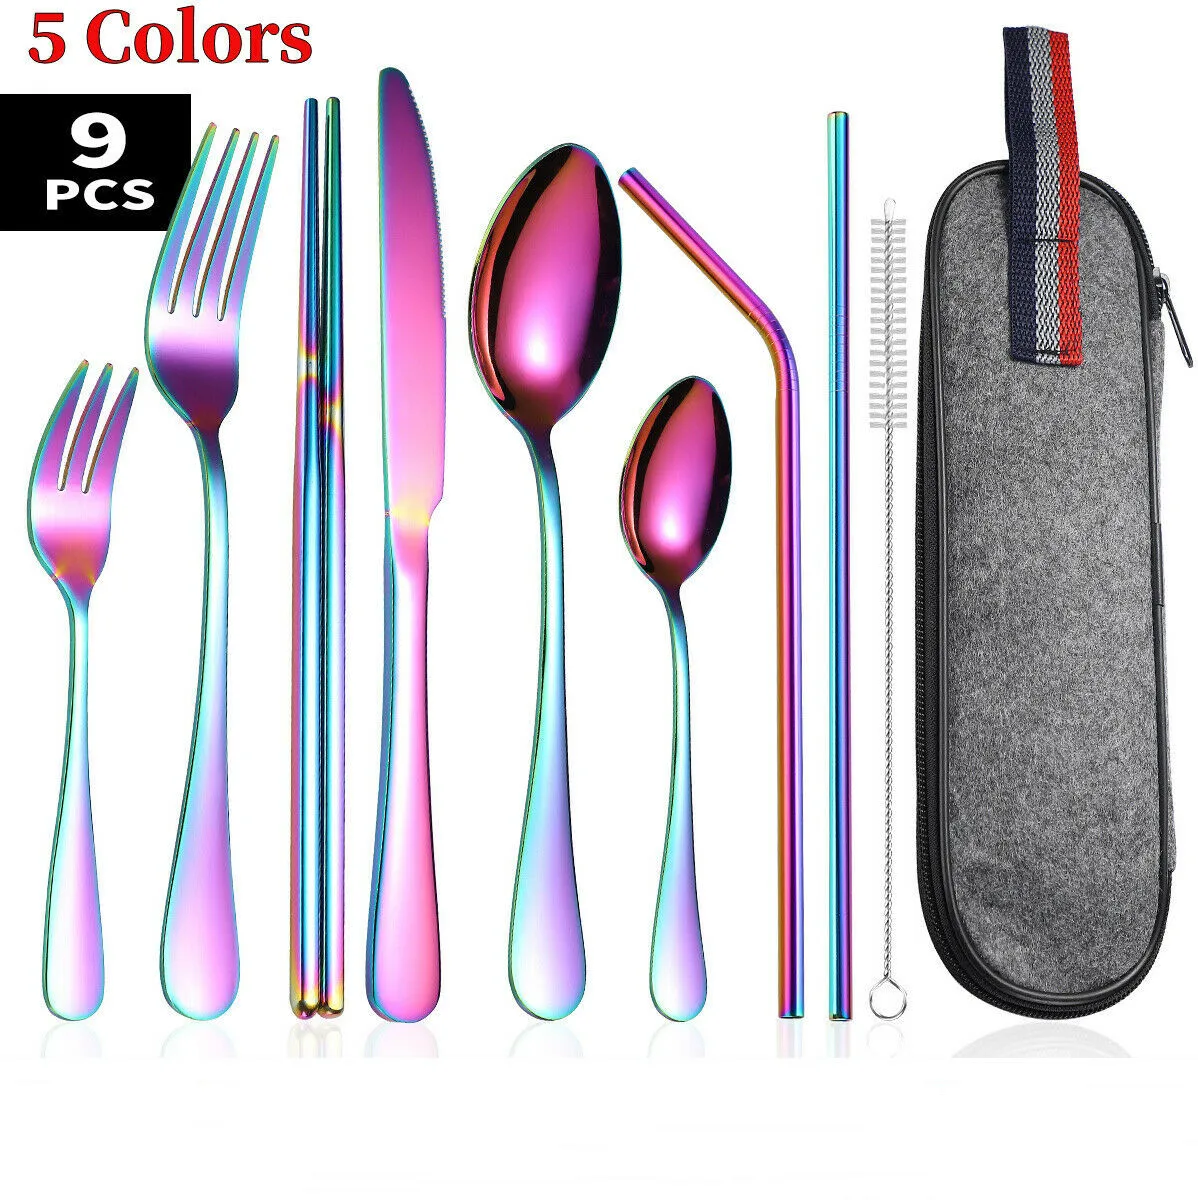 9PCS/Set Tableware Cutlery Set Knive Fork Spoon Chopstick straws Portable Stainless Steel Flatware Set Fork Spoon Travel Camping